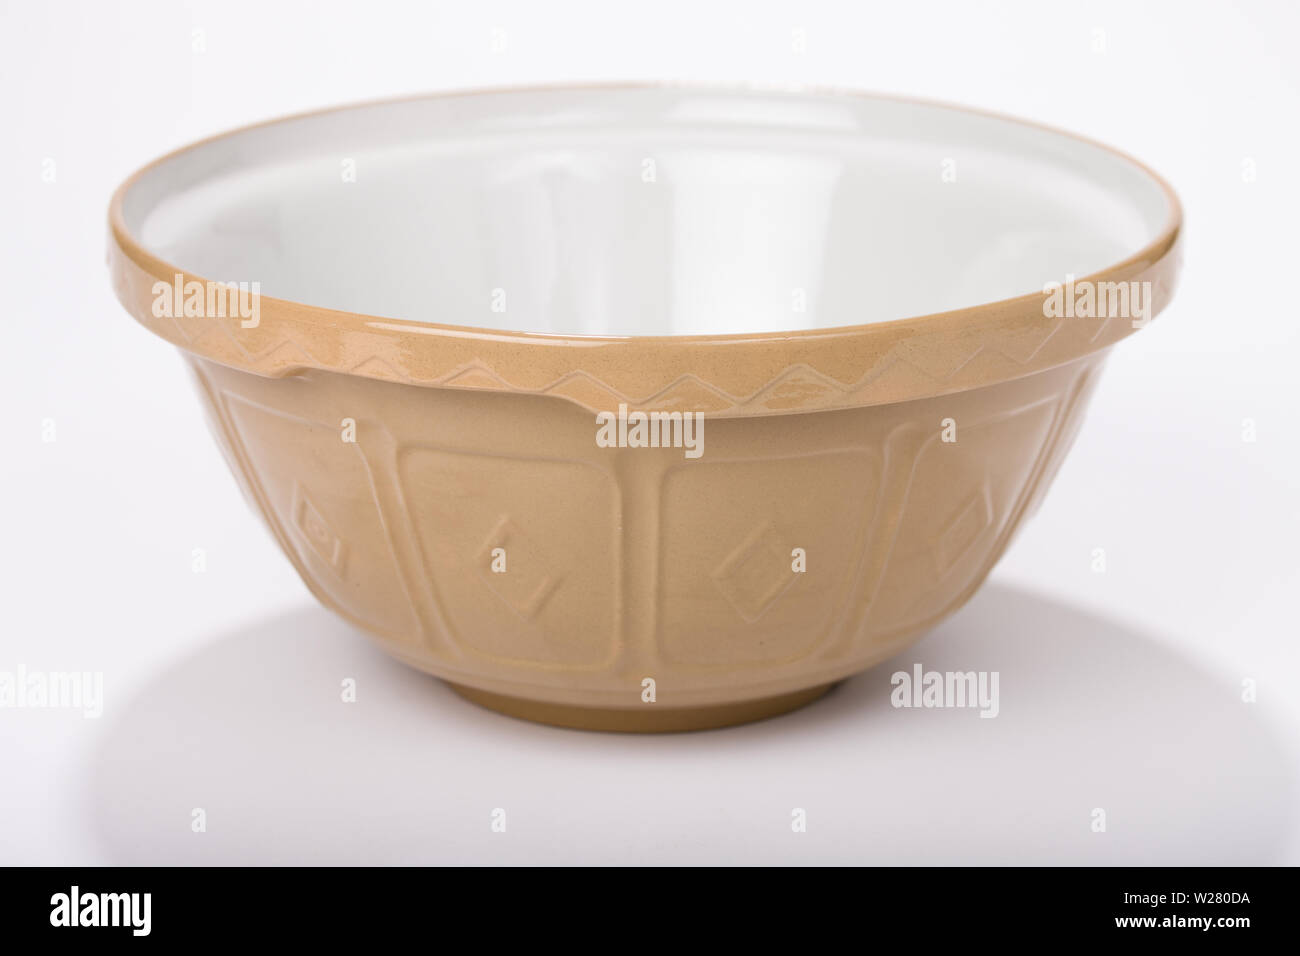 https://c8.alamy.com/comp/W280DA/a-large-stoneware-mixing-bowl-is-great-for-making-bread-or-cookies-W280DA.jpg